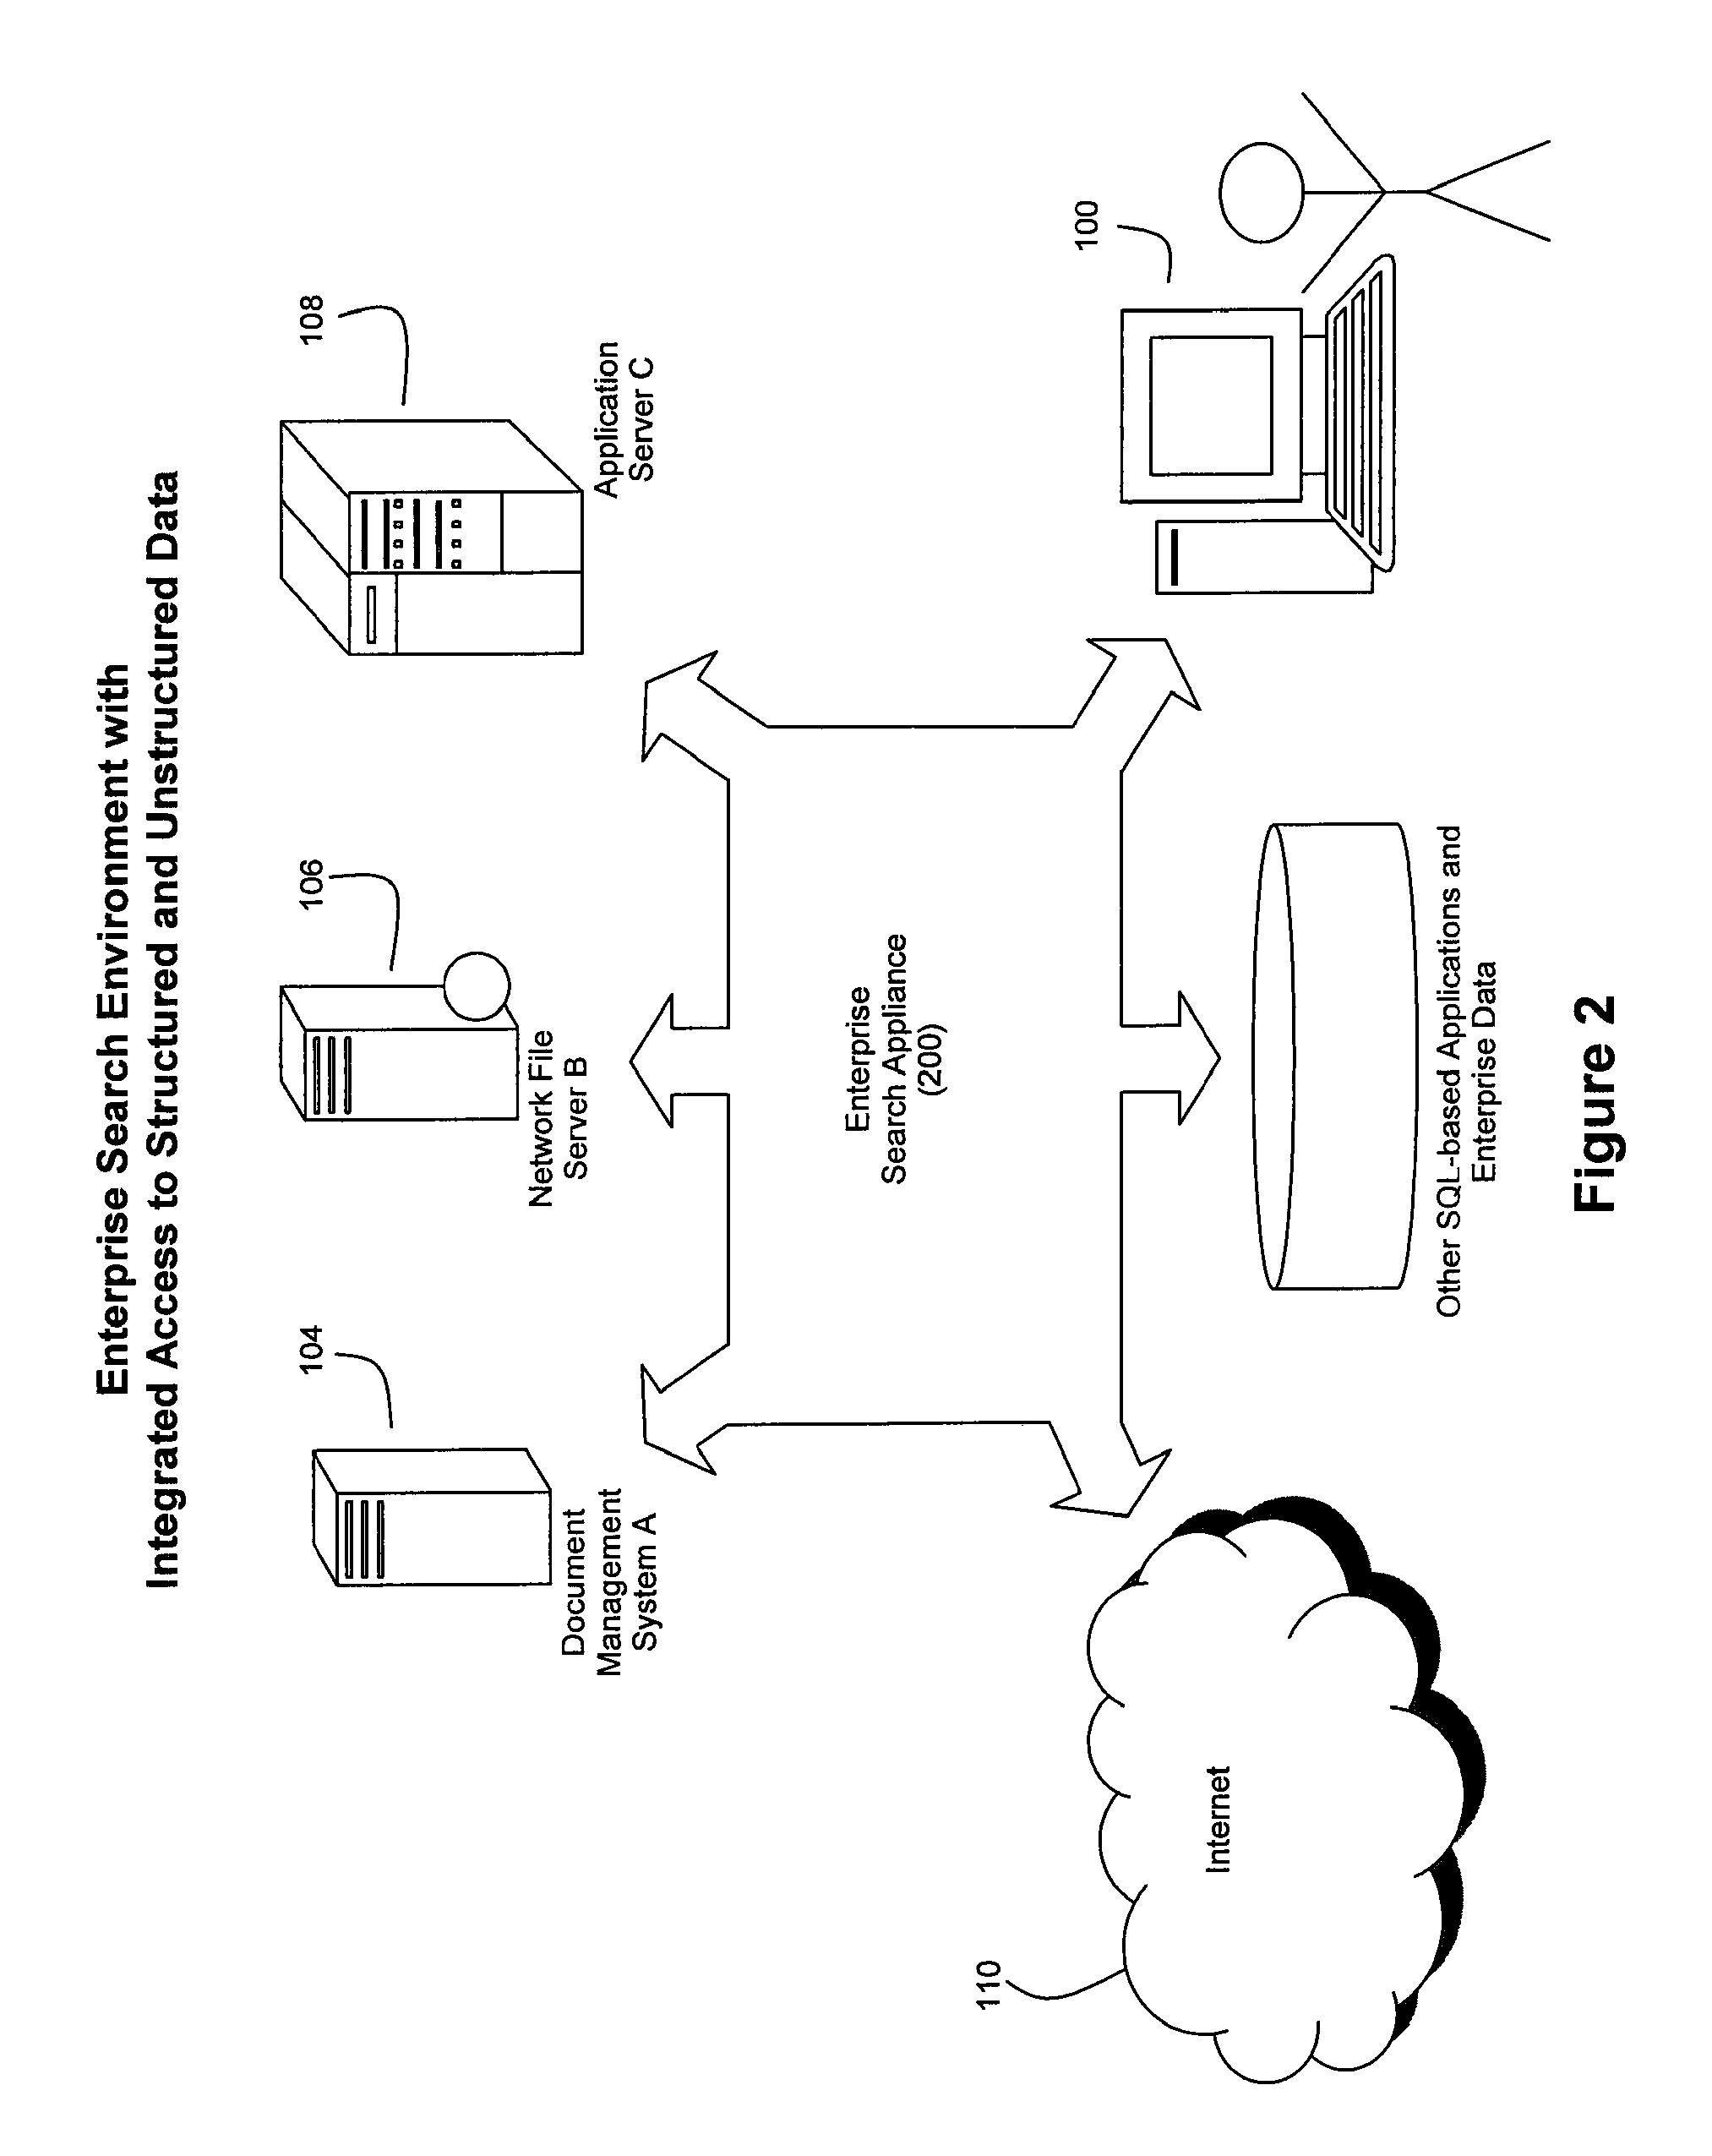 Method and System for High Performance Integration, Processing and Searching of Structured and Unstructured Data Using Coprocessors